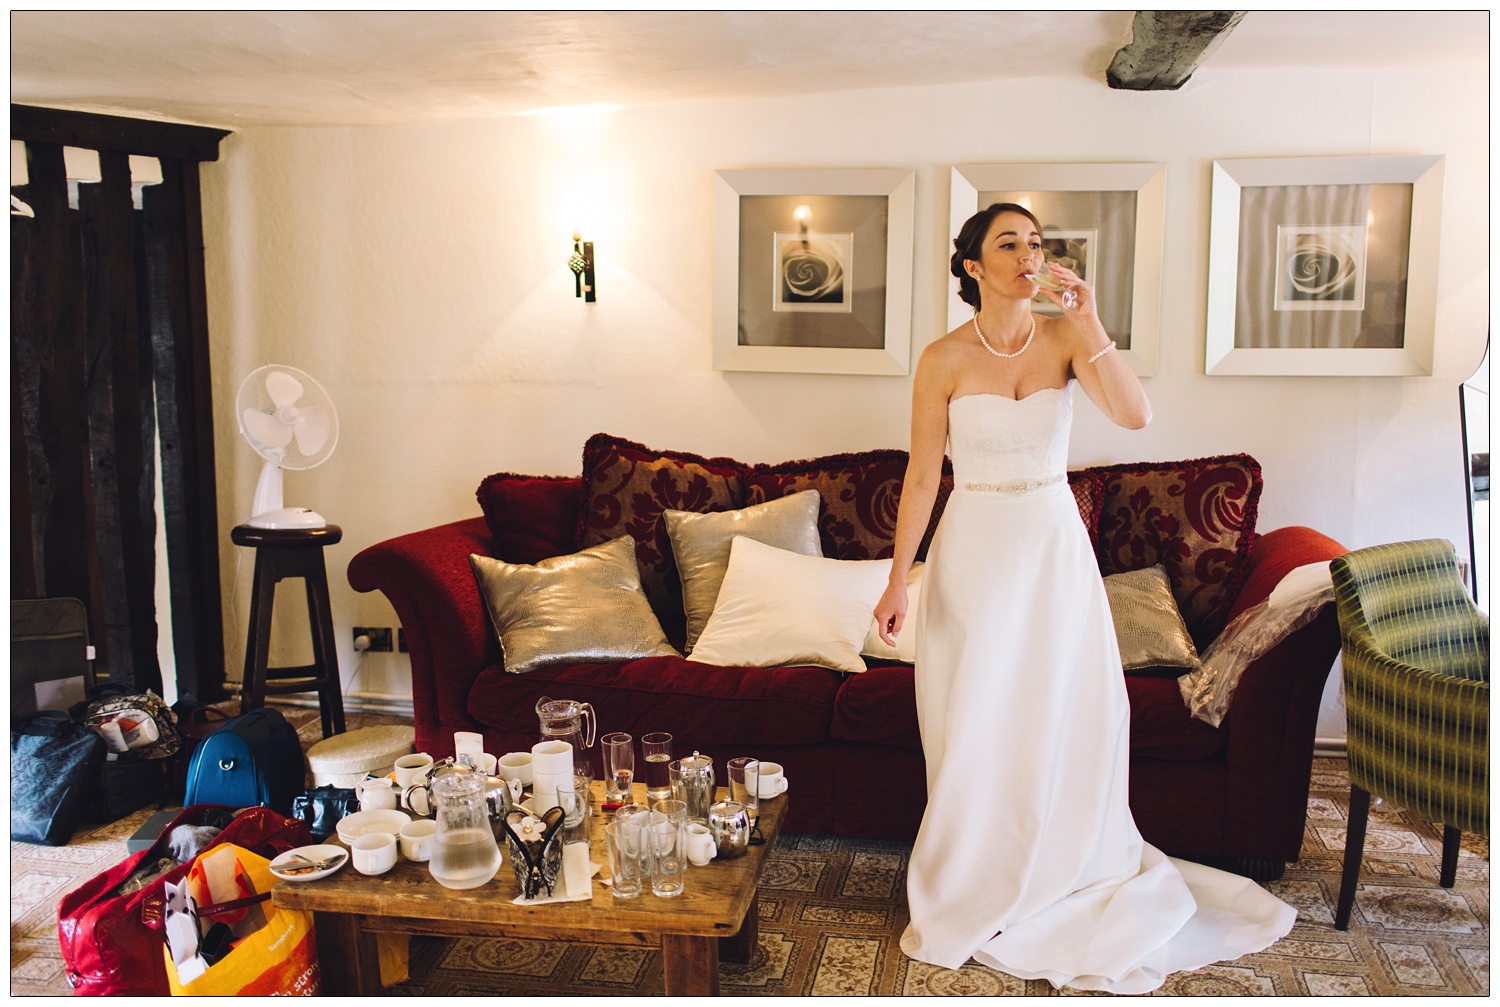 bride having one last sip of prosecco before getting married. She's i her dress, there are glasses and cups on the coffee table. Bags for life on the floor full of items needed to get ready.